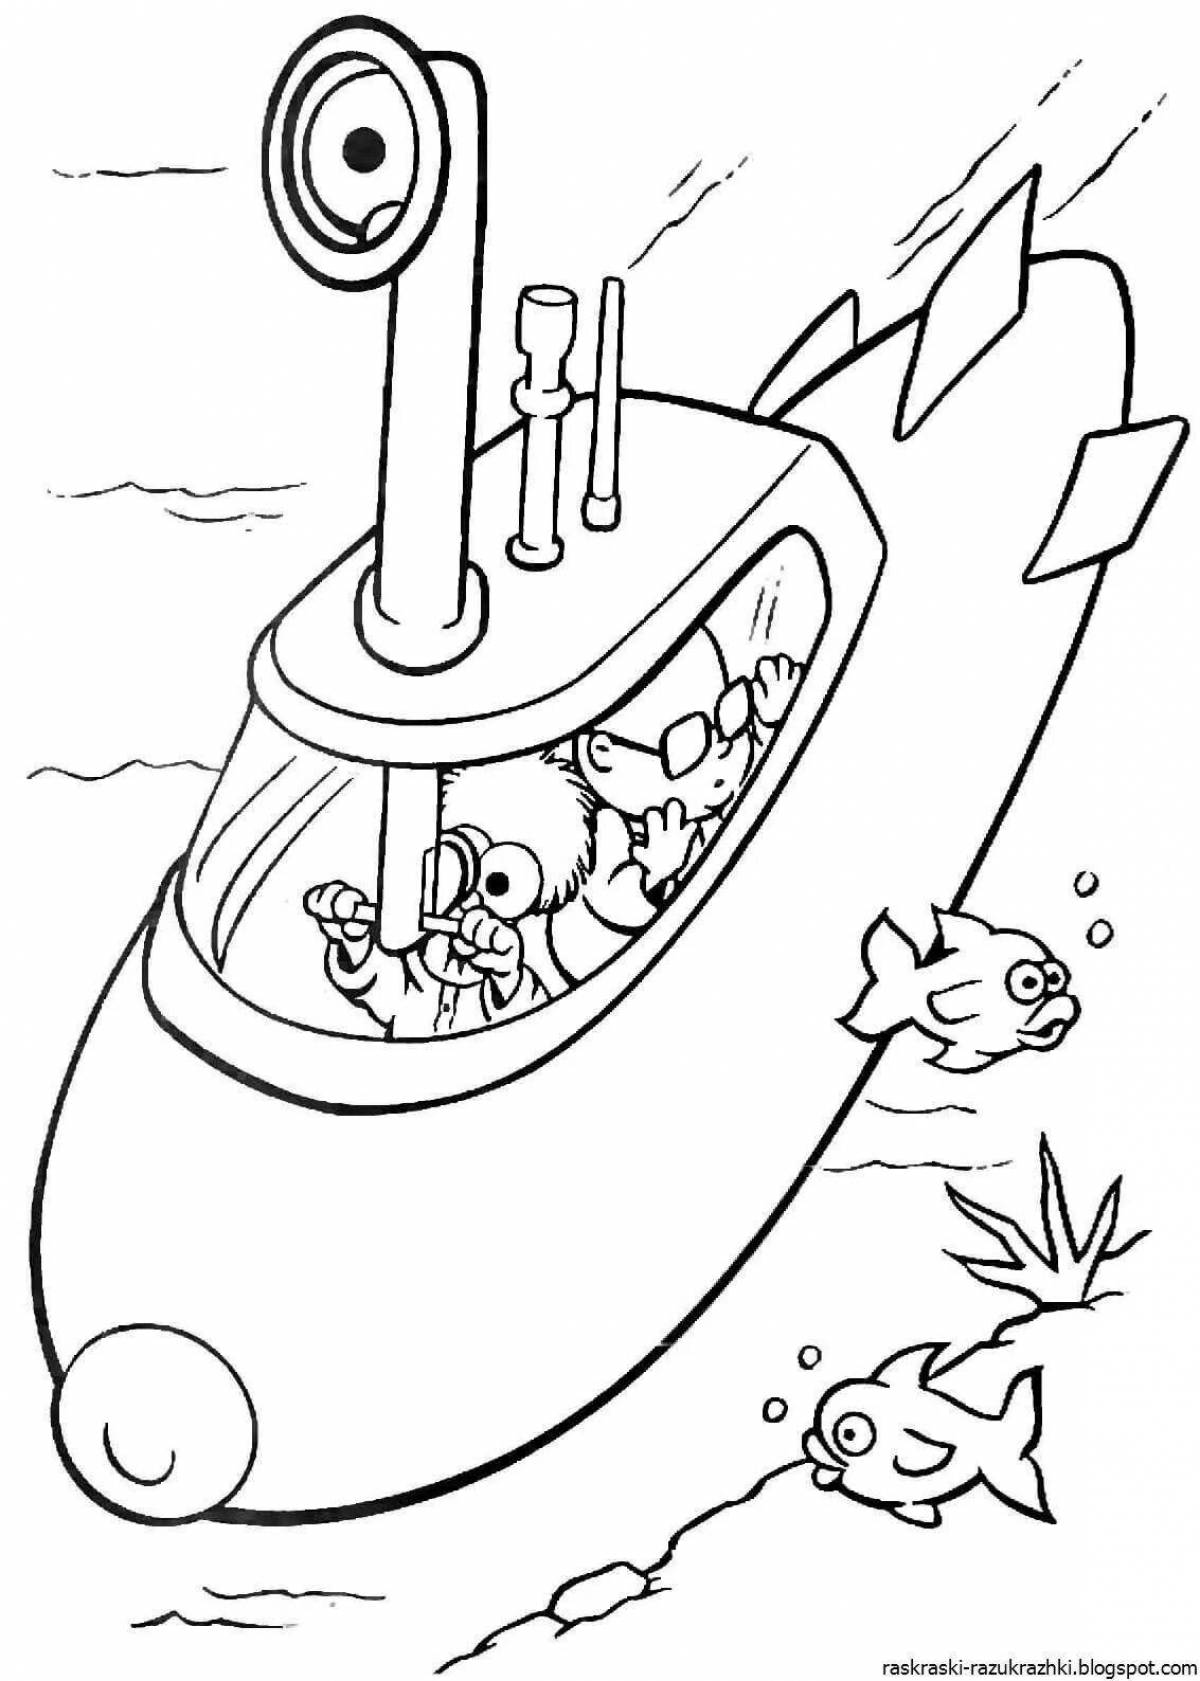 Glorious submarine coloring for children 5-6 years old